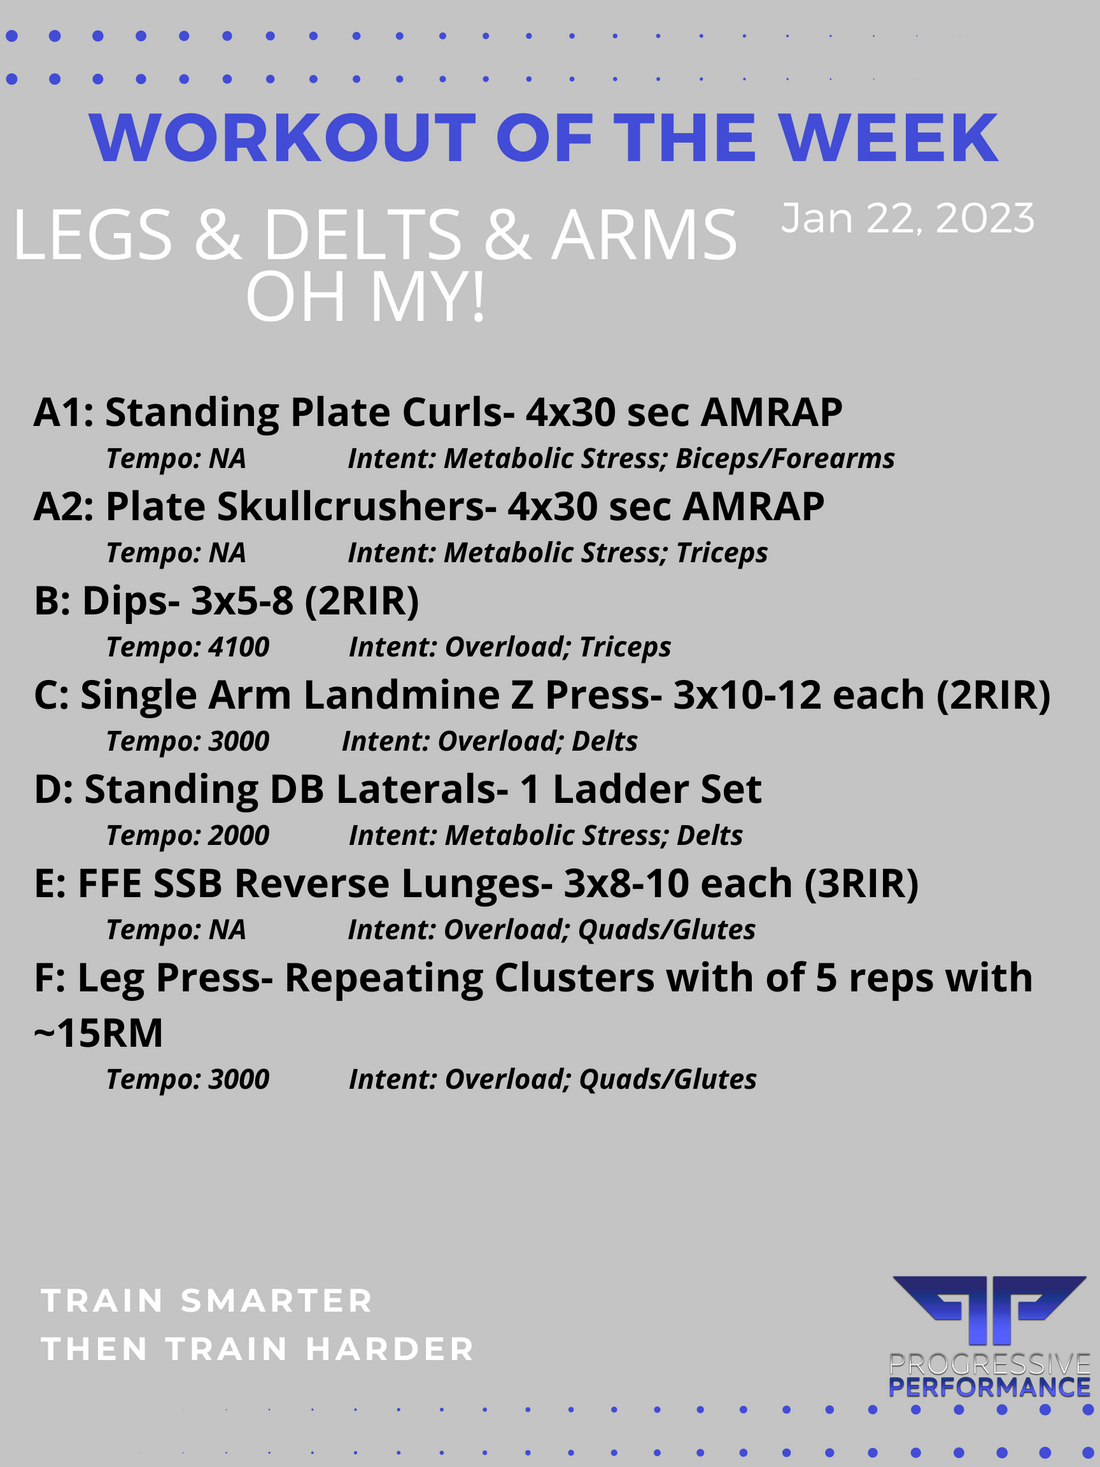 Legs and Delts and Arms Oh My!